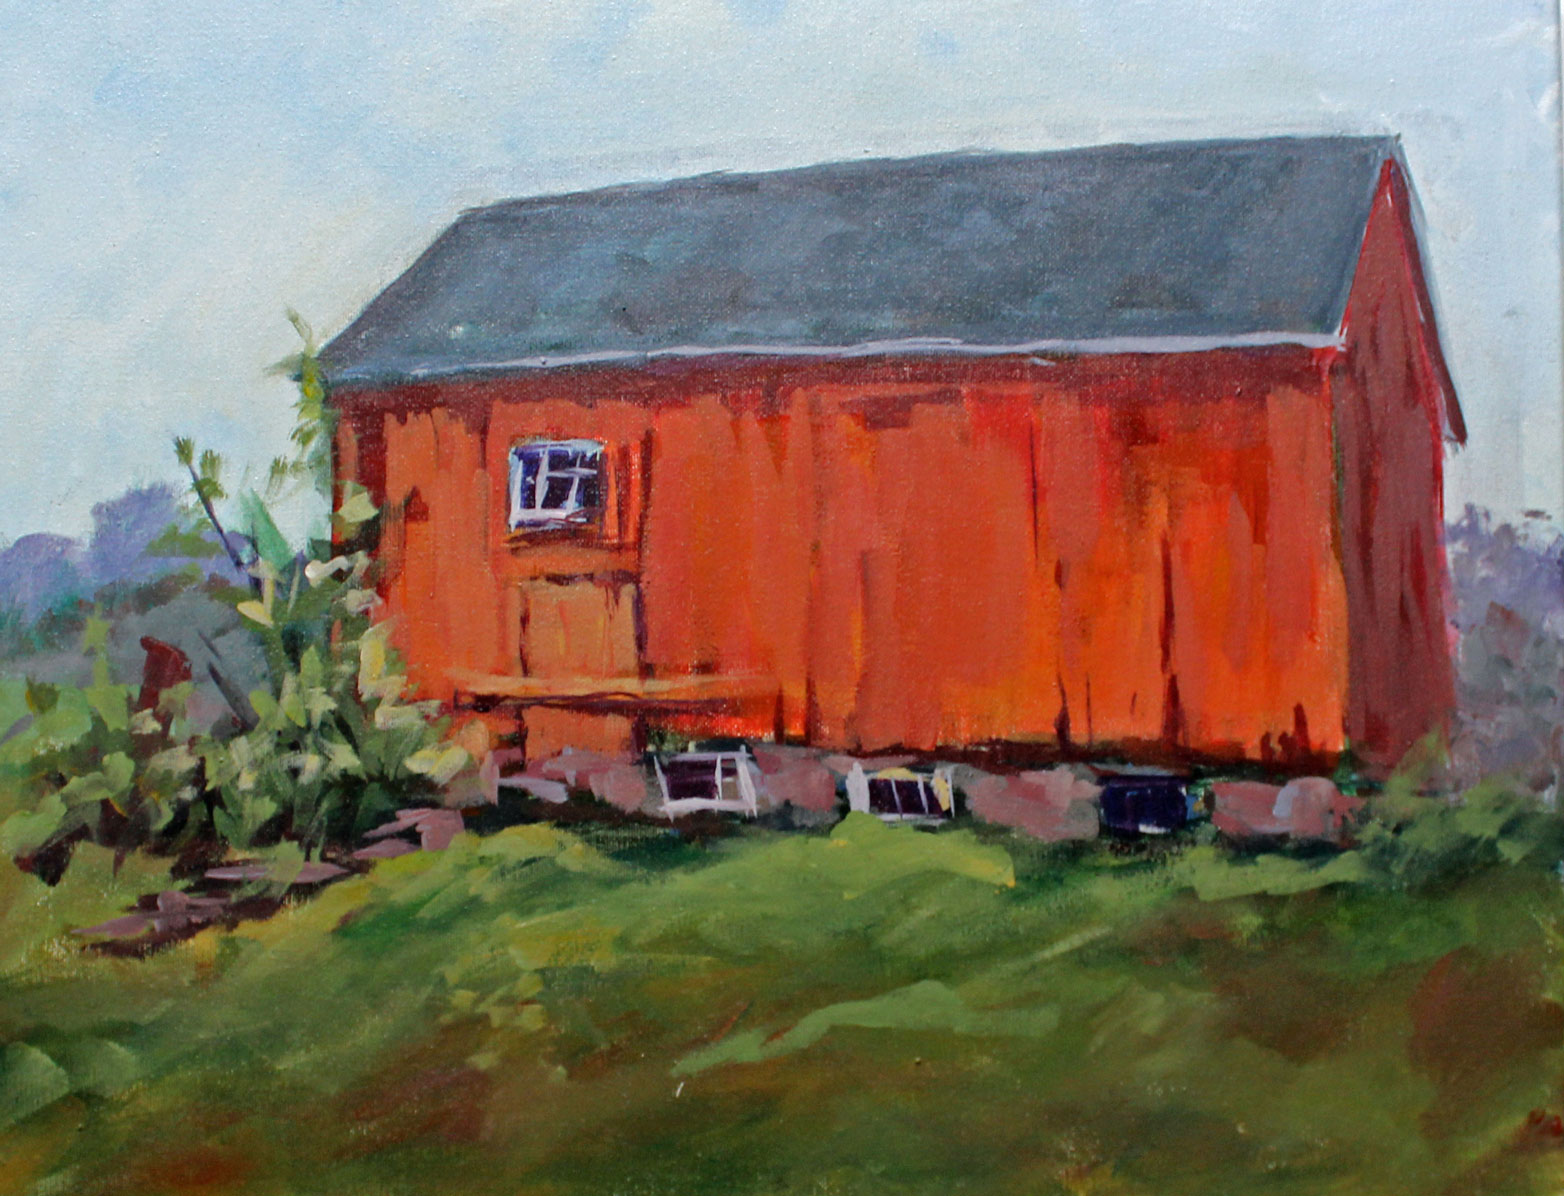 The Red Barn at Meetinghouse Hill by Sharon Chaples</font></a>